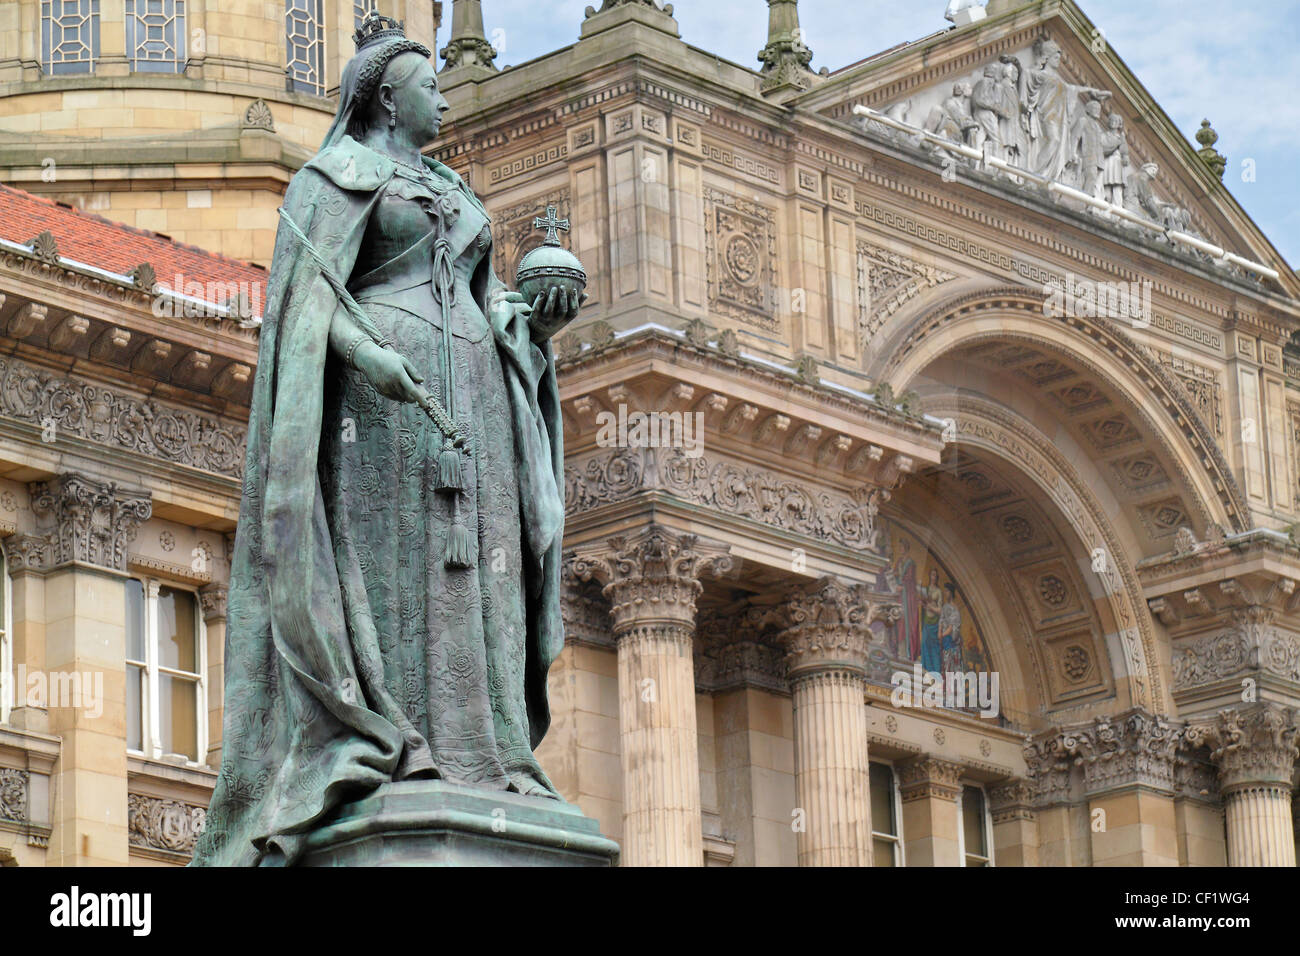 Statue of Queen Victoria in front of the Council House in Victoria Square, Birmingham. Stock Photo